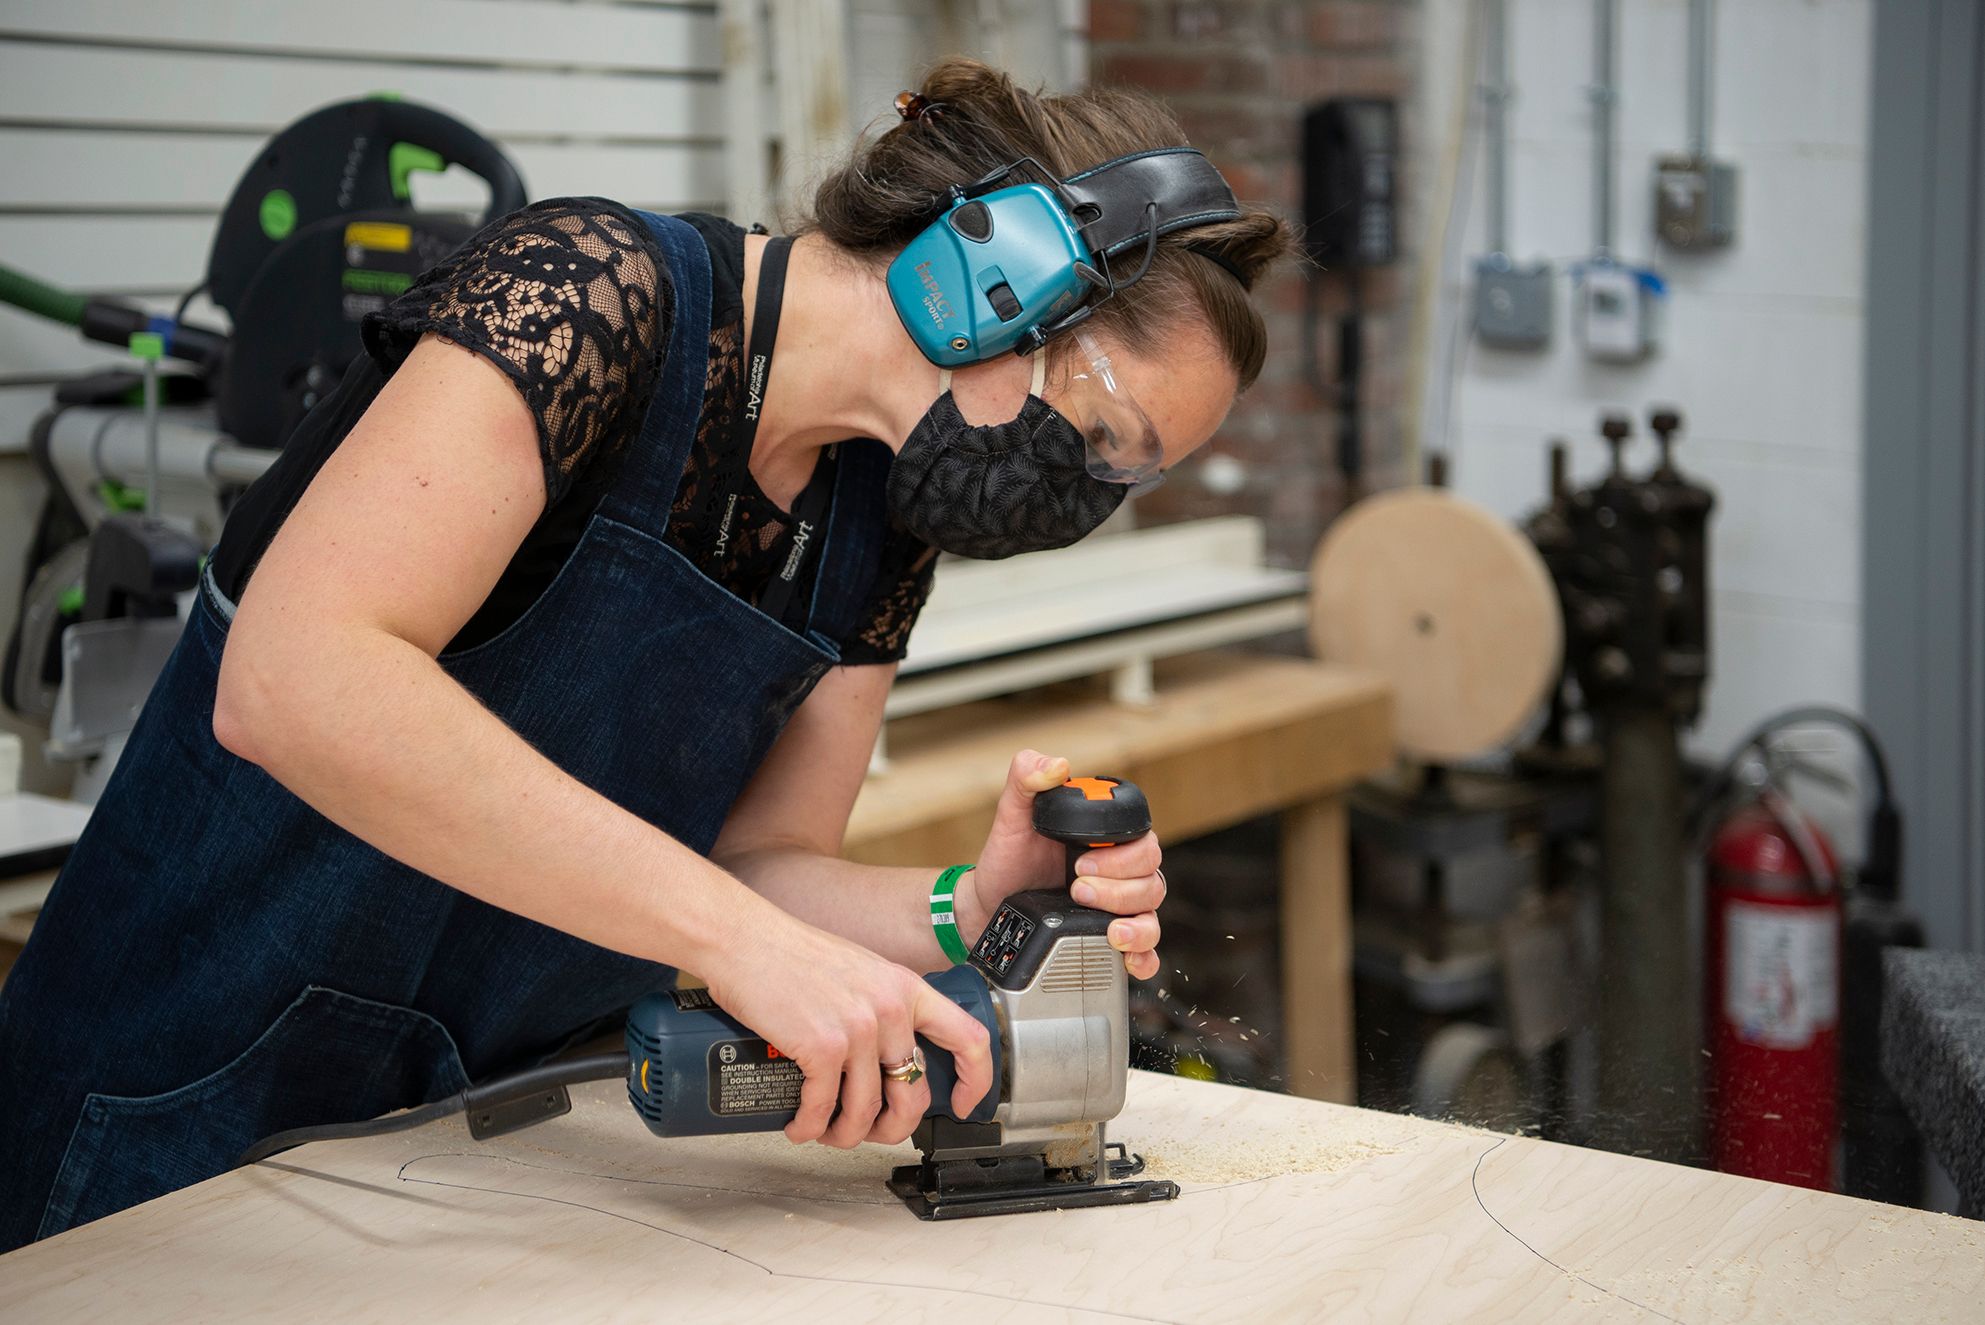 A conservator using a power tool to cut a plank of wood